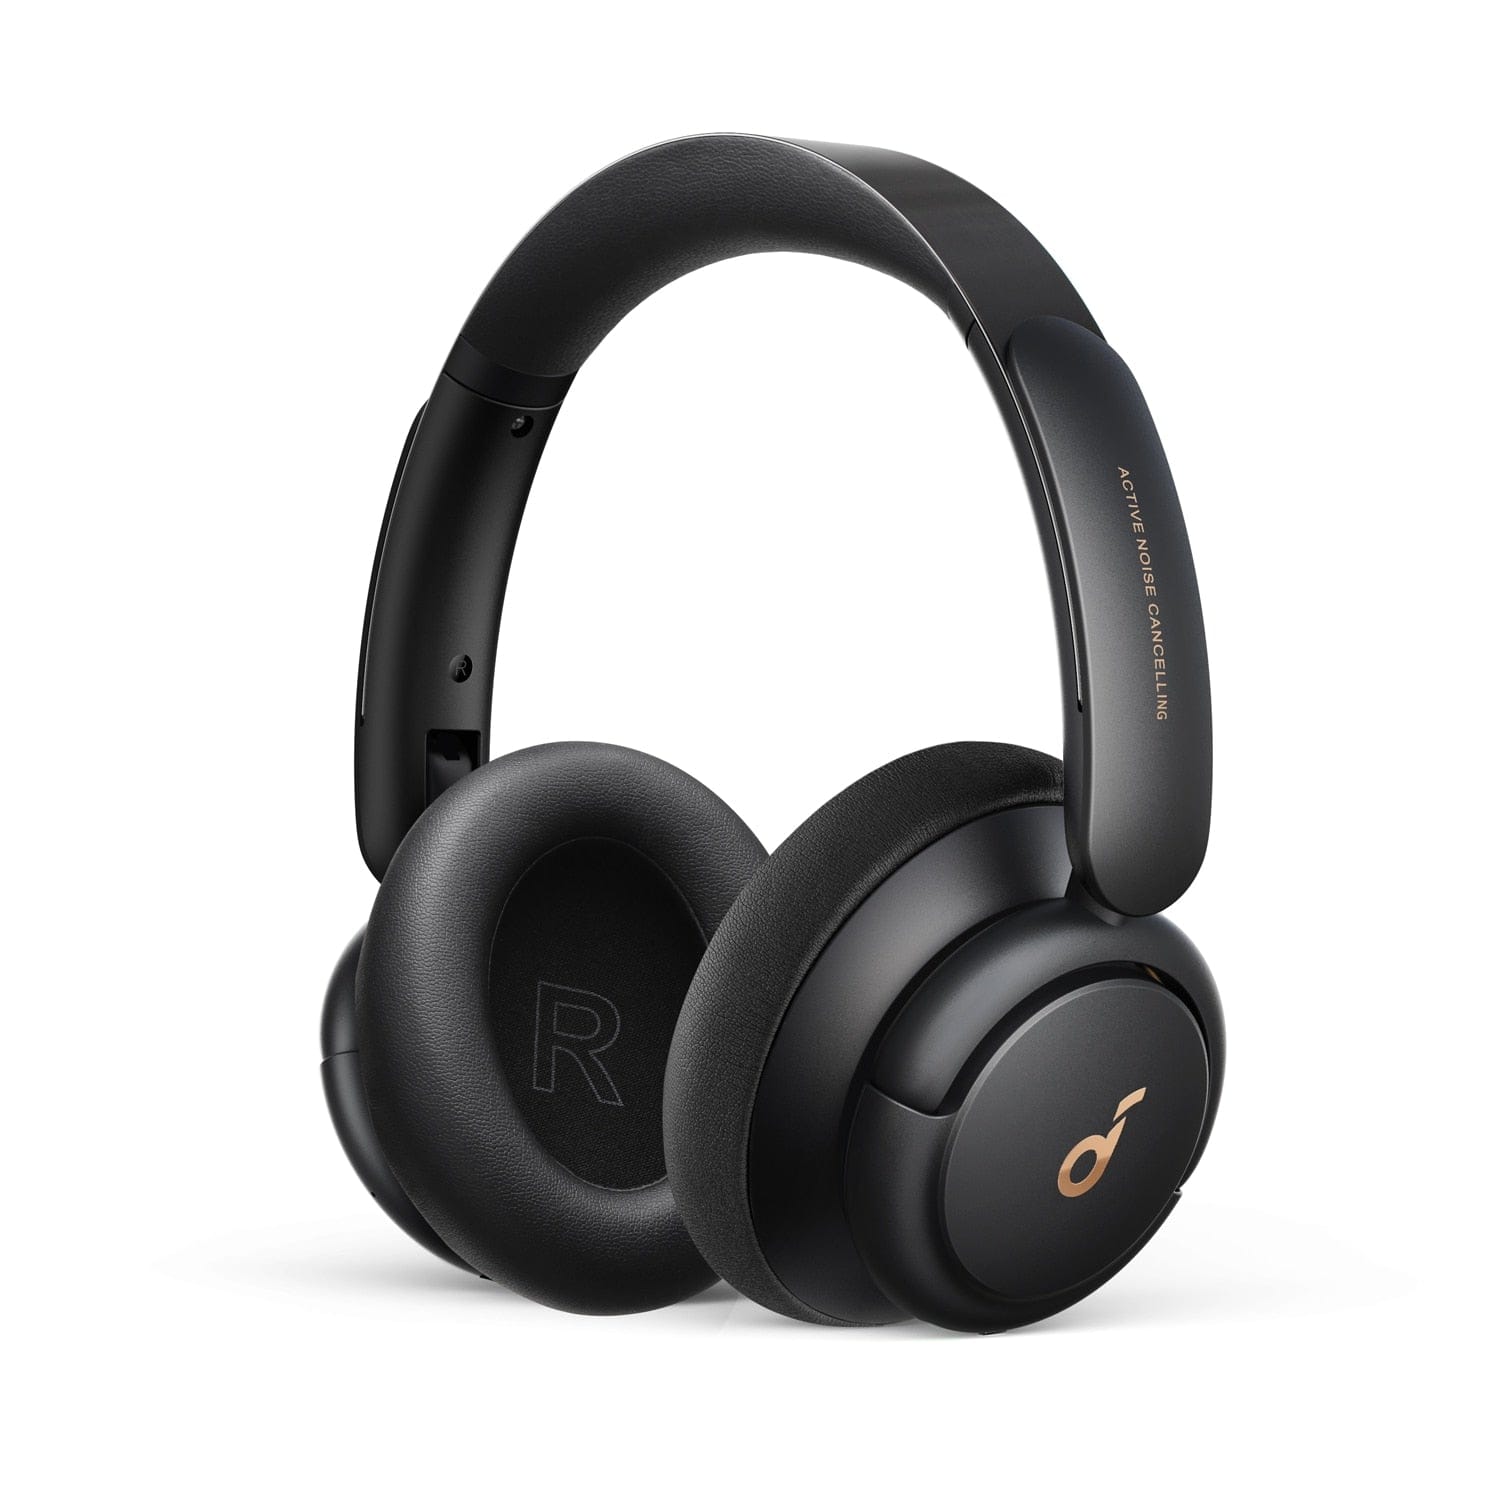 Soundcore Soundcore, Wireless Headphone, Version Life Q30, Supports Bluetooth 5.0, Playtime up to 40 Hours, Color Black